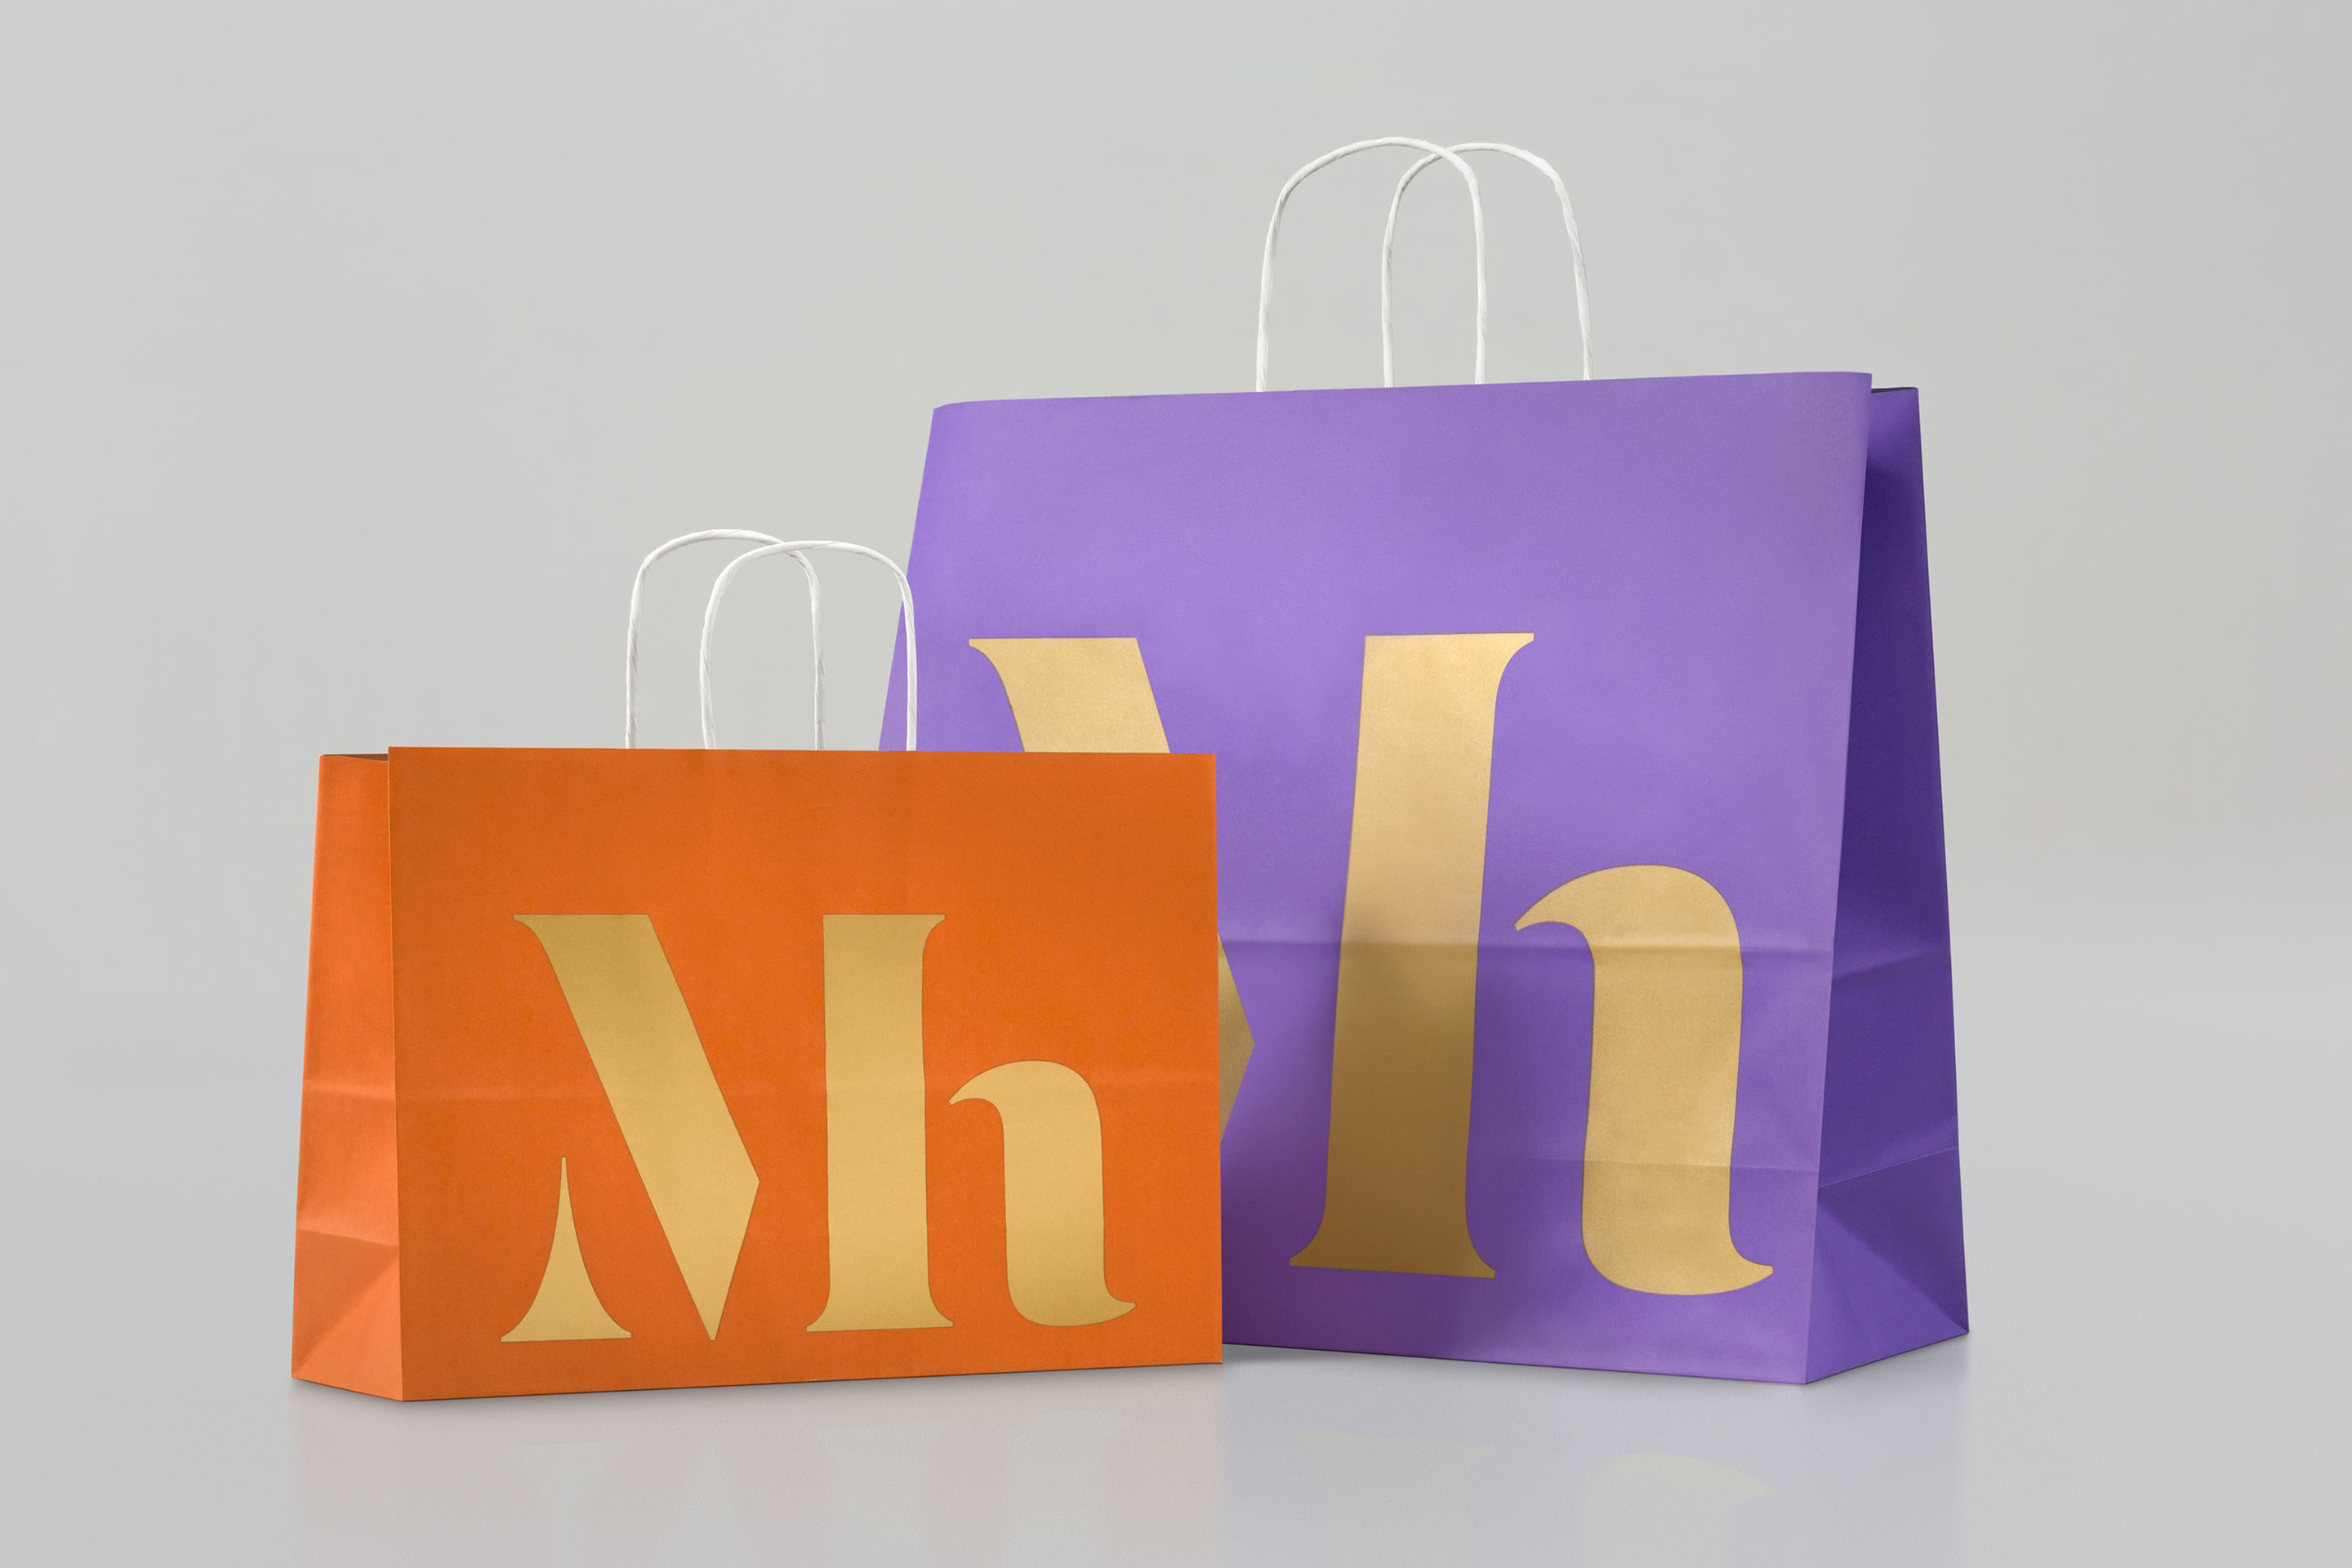 studio dumbar design visual brand identity for Mauritshuis Royal Picture Gallery paper gift bags design with monogram